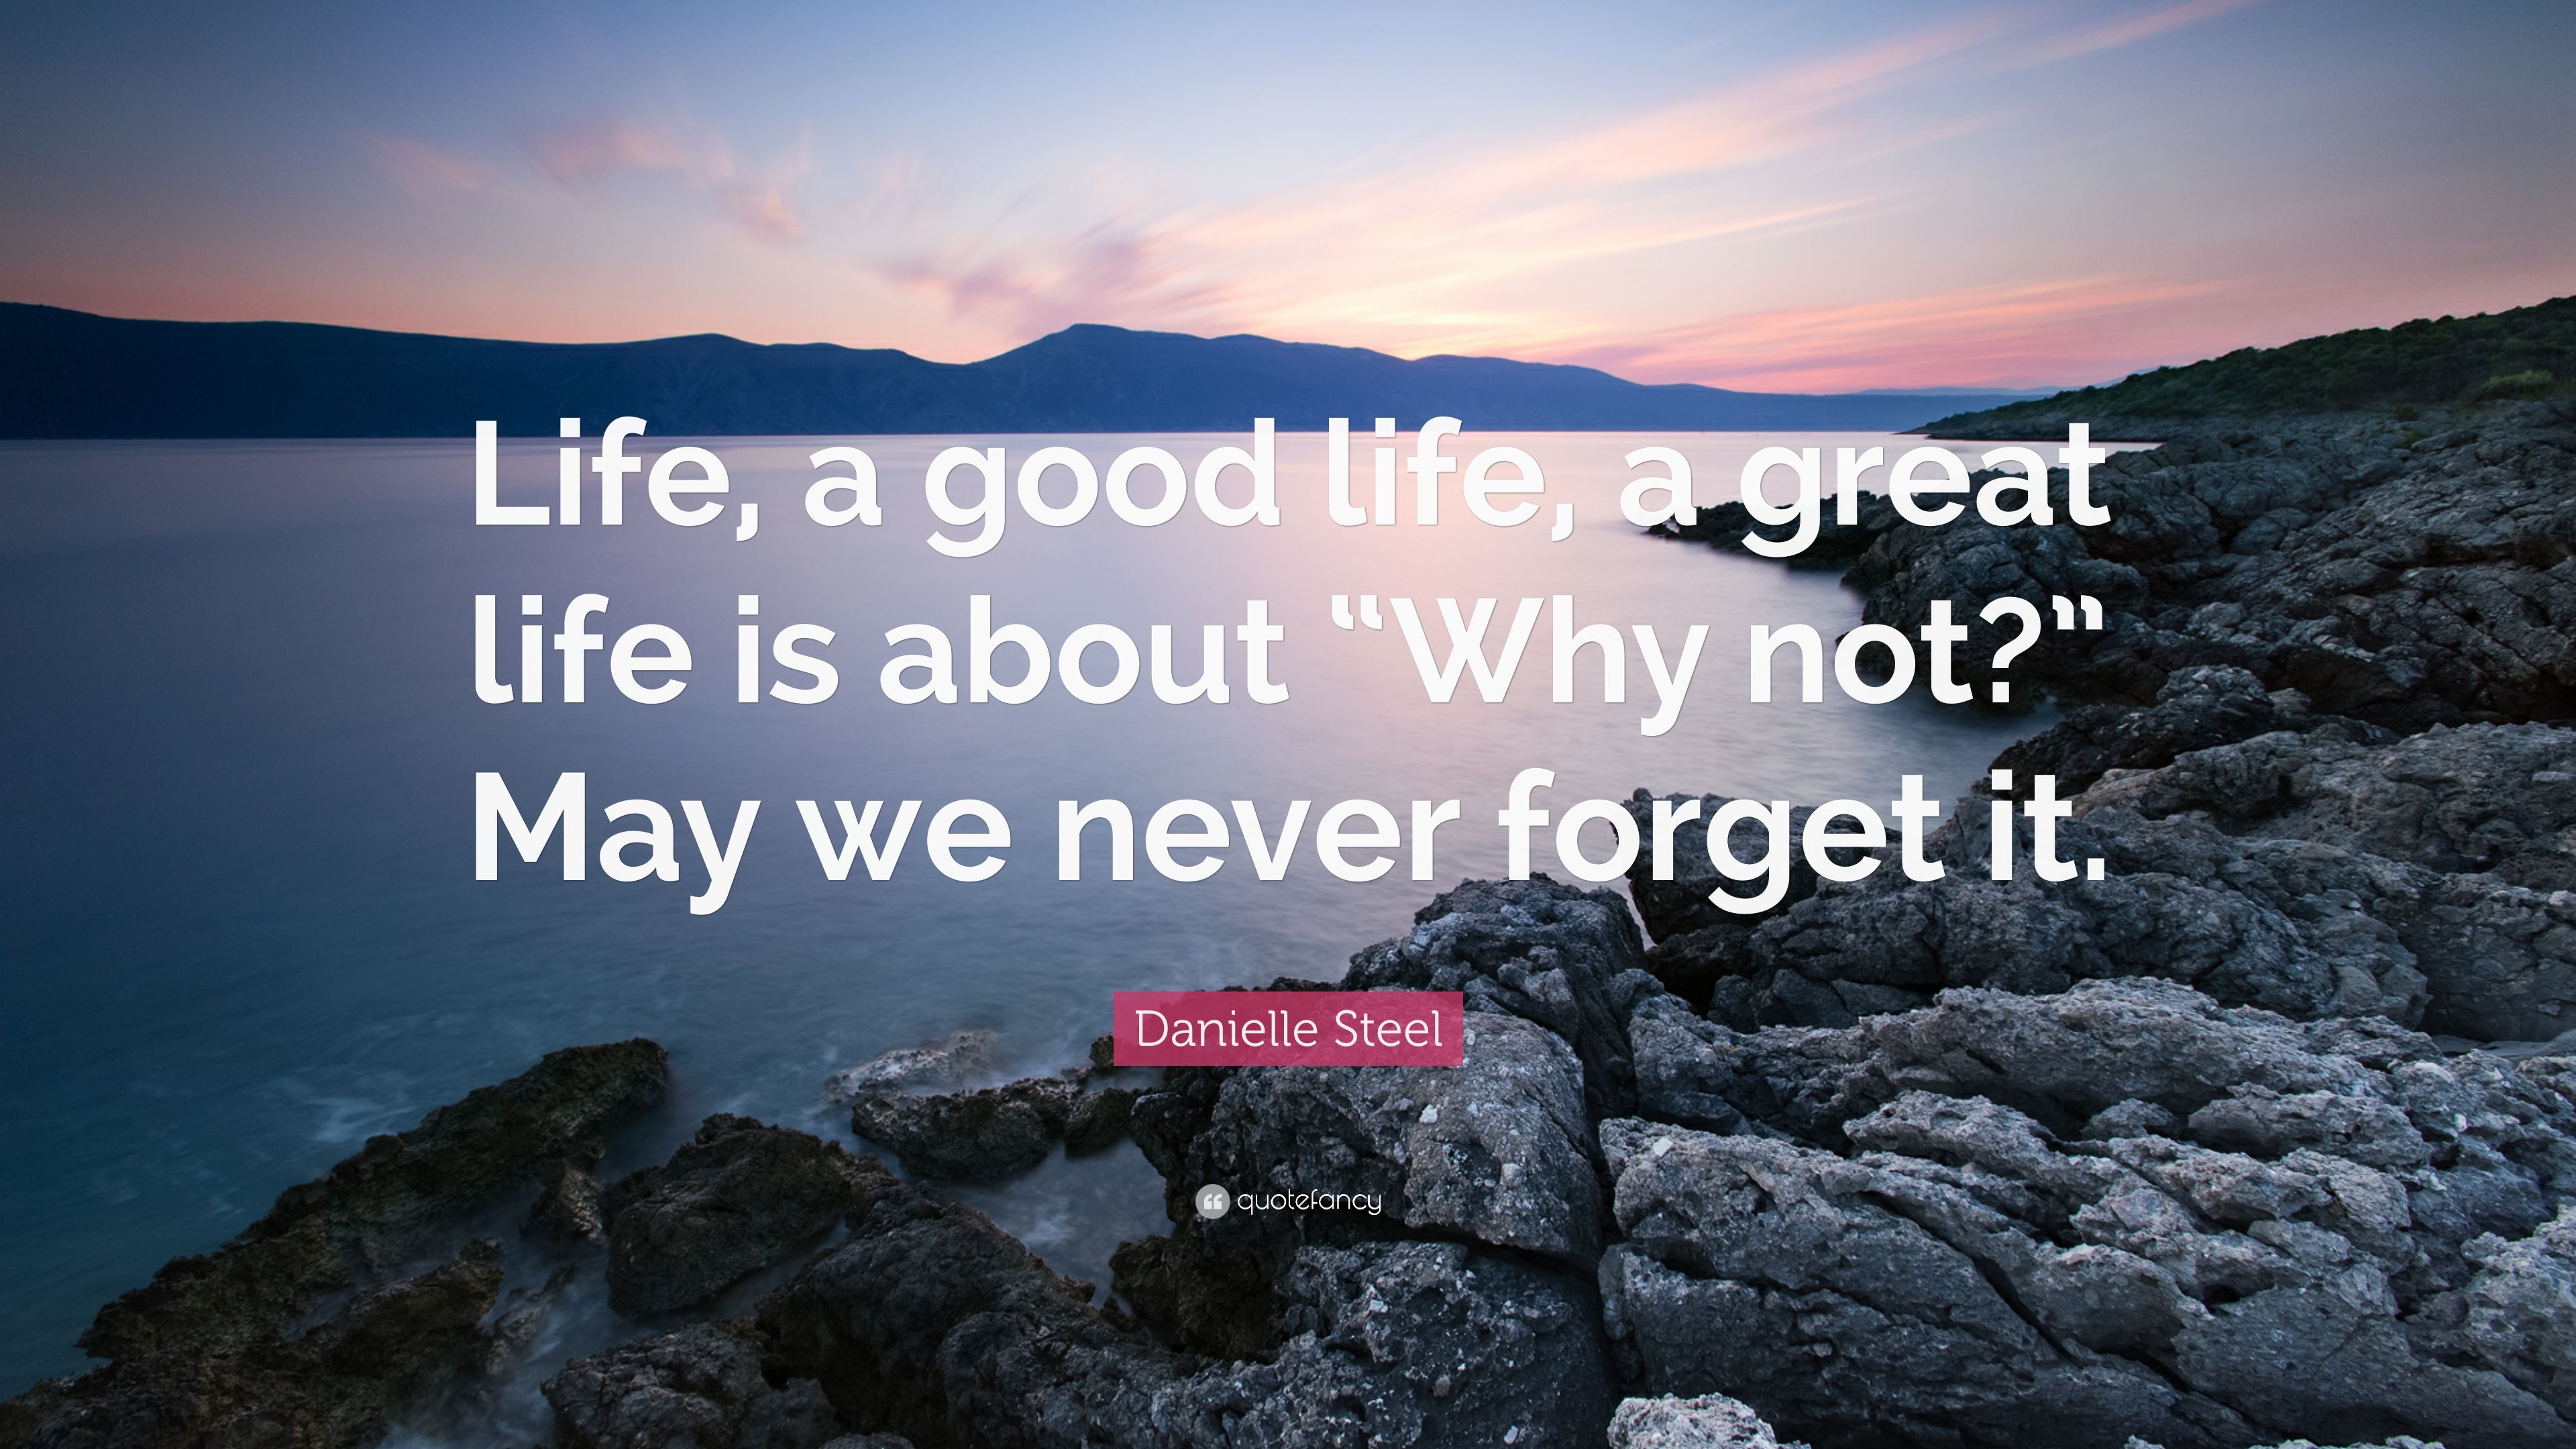 Danielle Steel Quote: “Life, a good life, a great life is about “Why not?” May we never forget it.” (9 wallpaper)